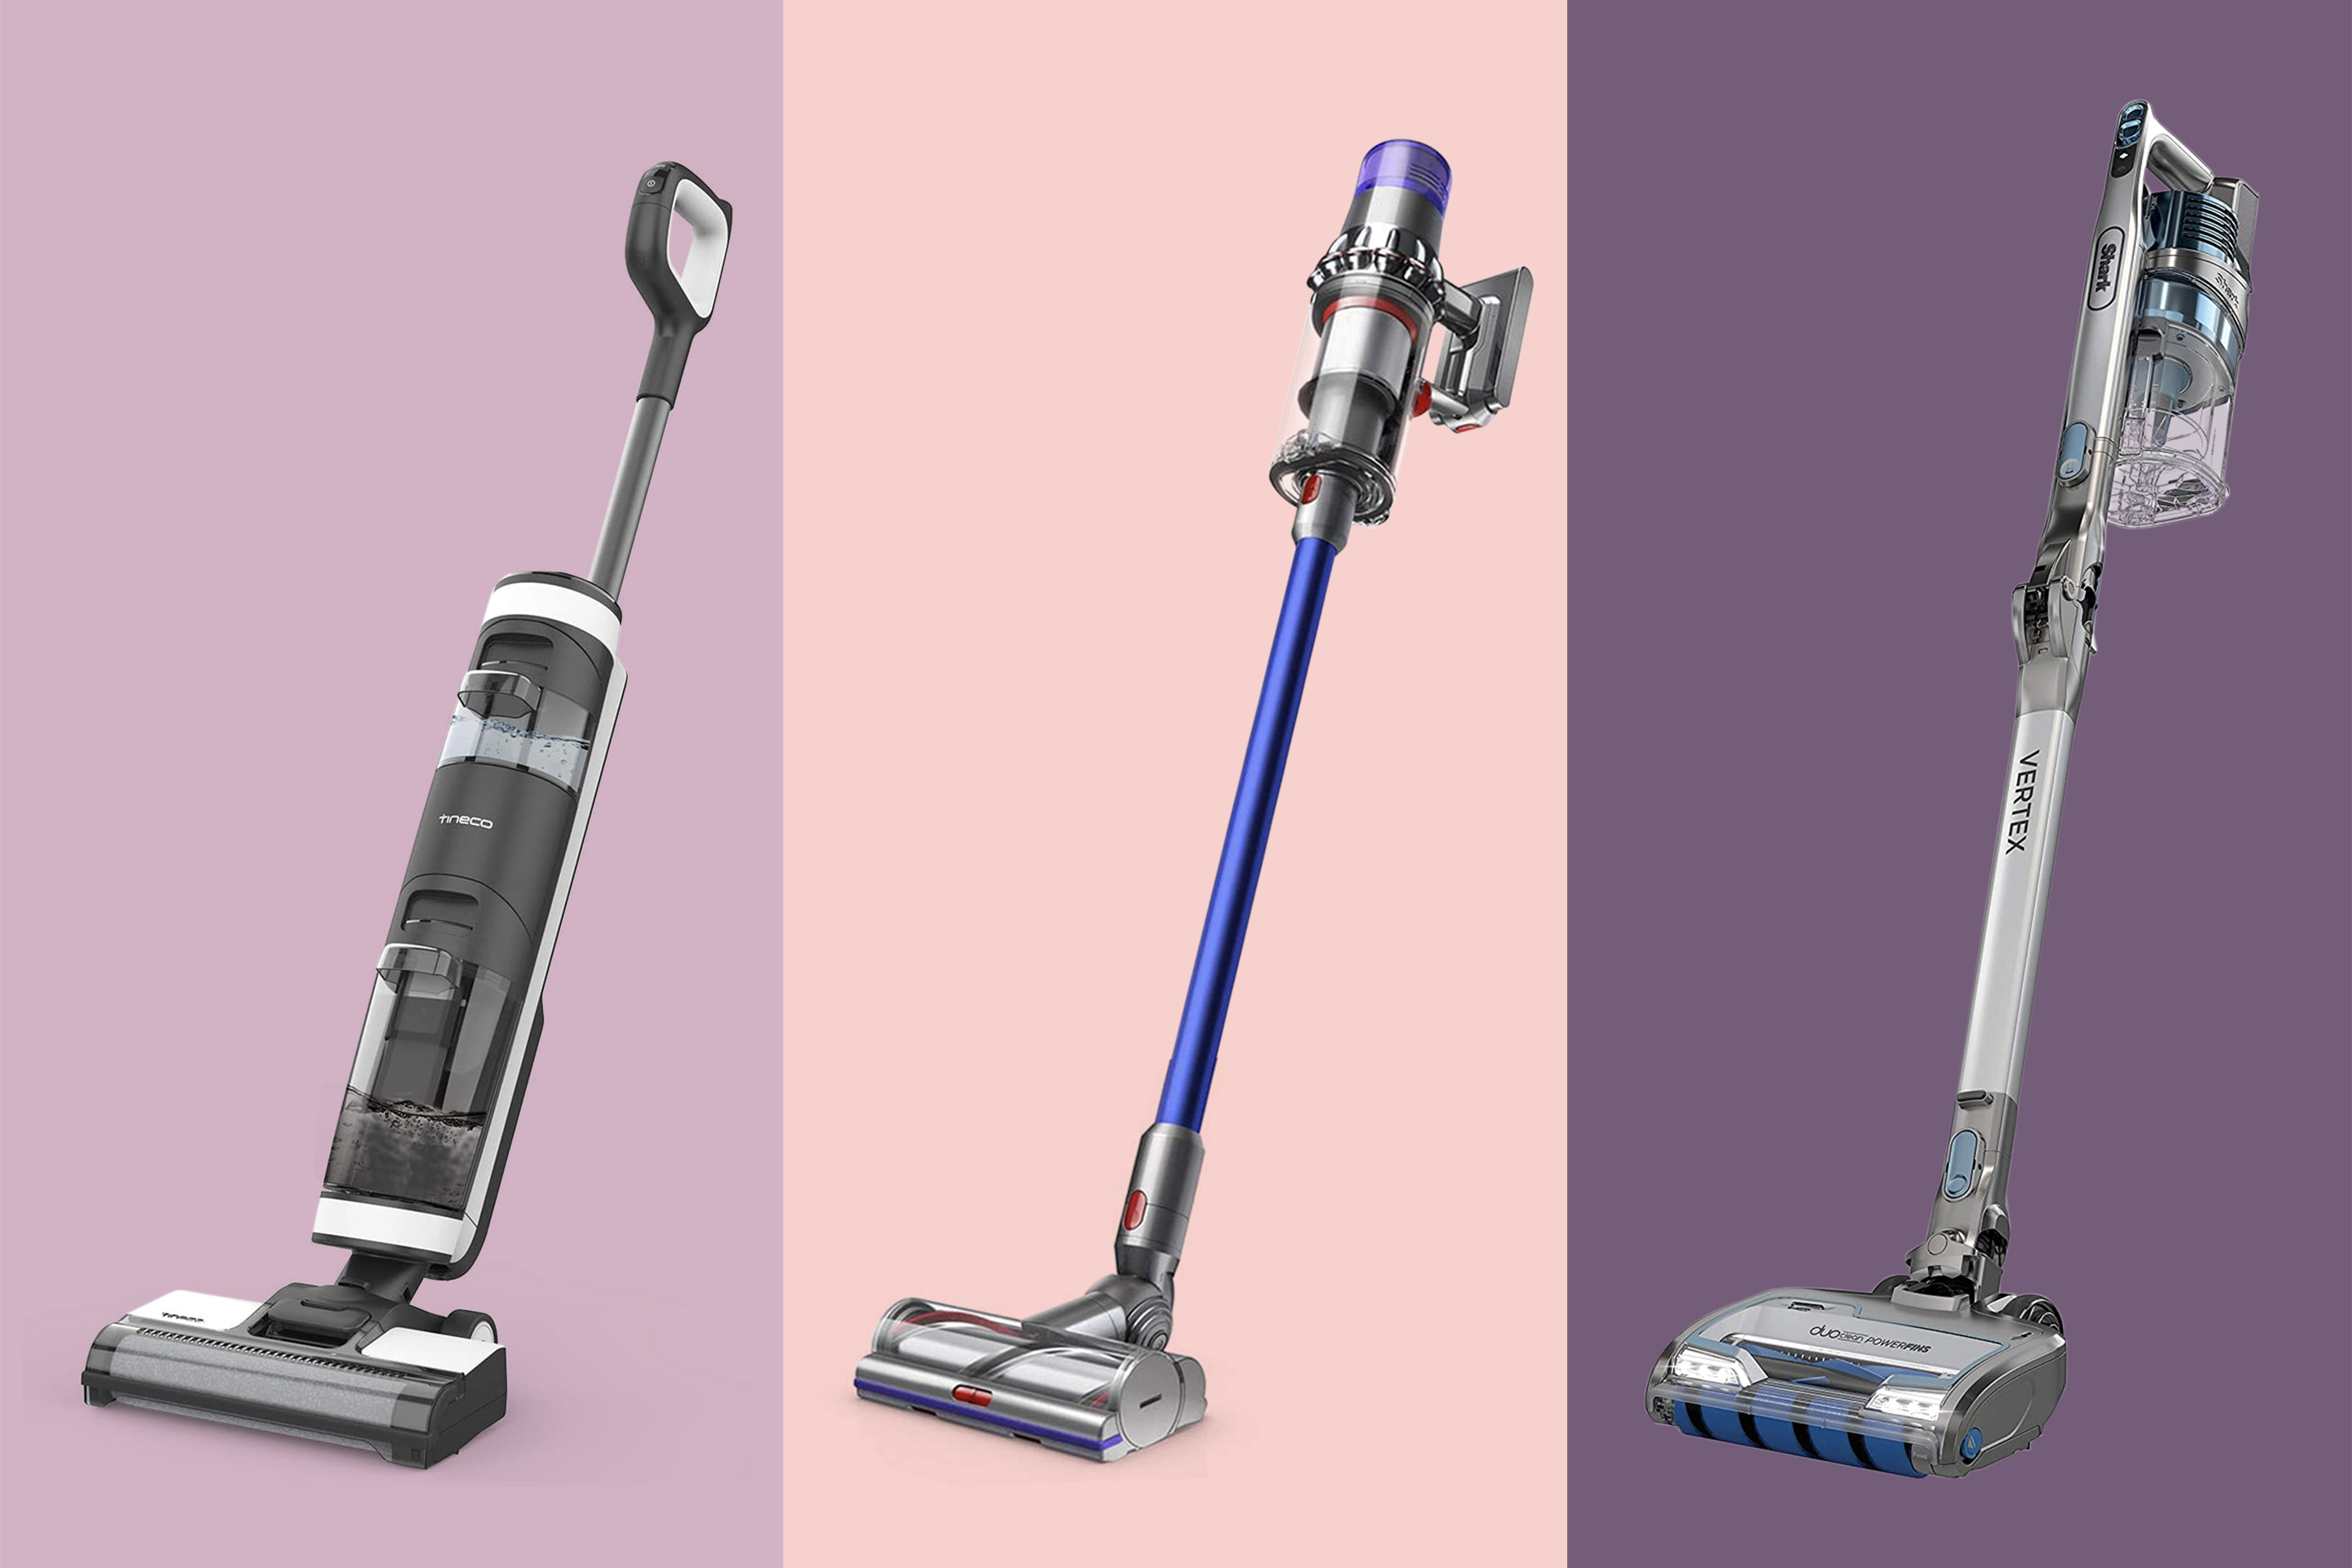 Best Cordless Vacuum Cleaner For 2021, Best Cordless Vacuum Cleaner For Hardwood Floors And Carpet